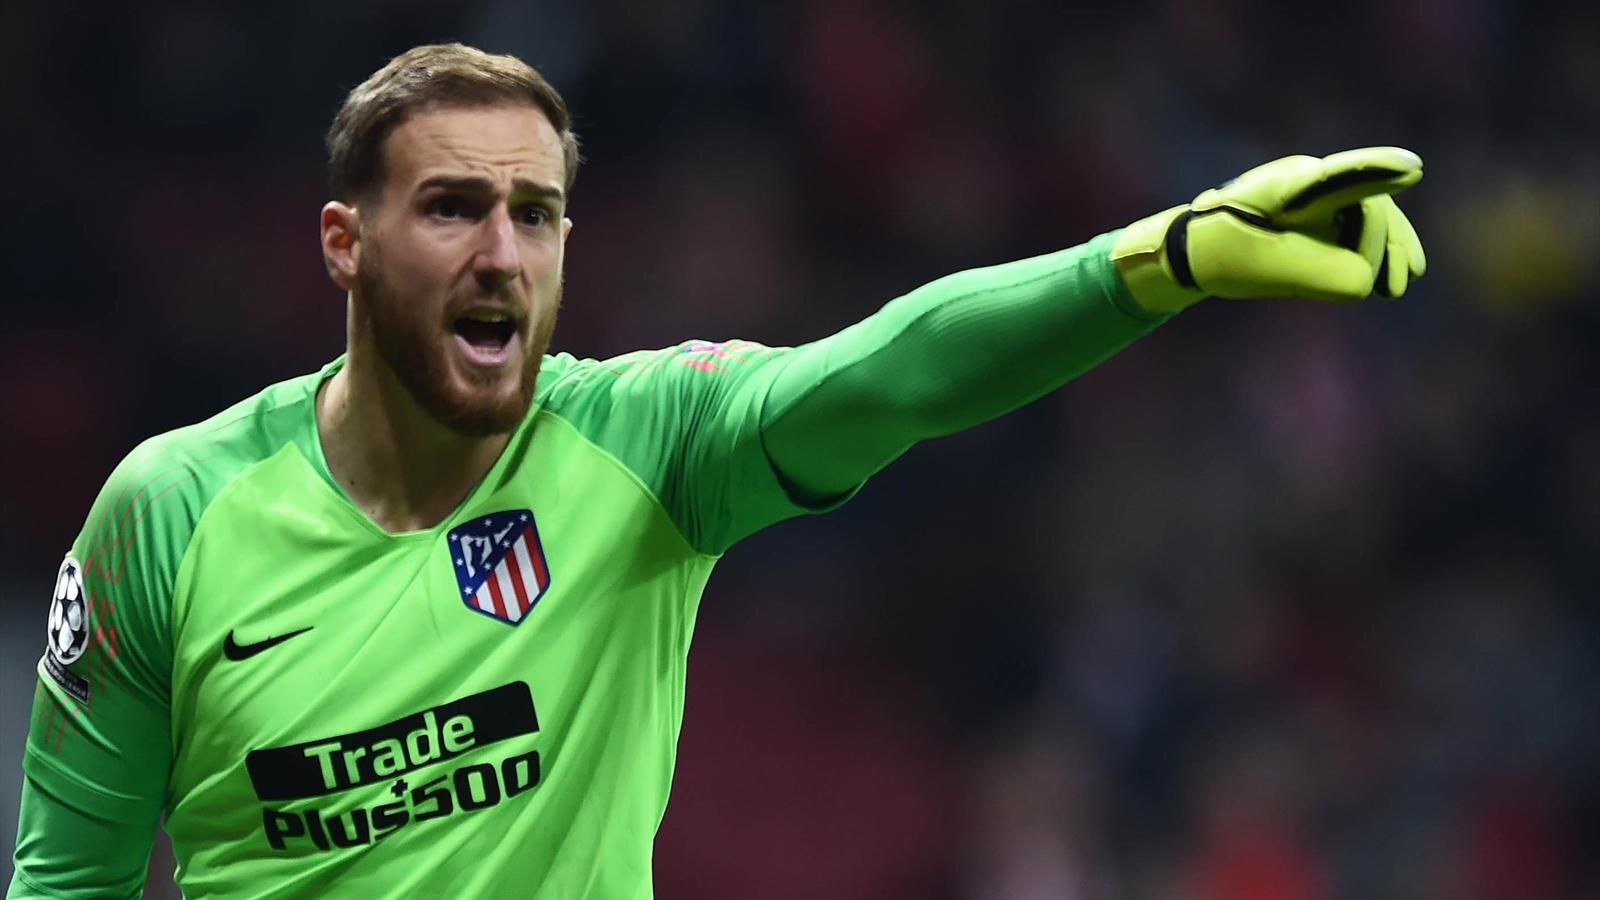 Jan Oblak May Become the Most Expensive Goalkeeper If Chelsea Signs Him